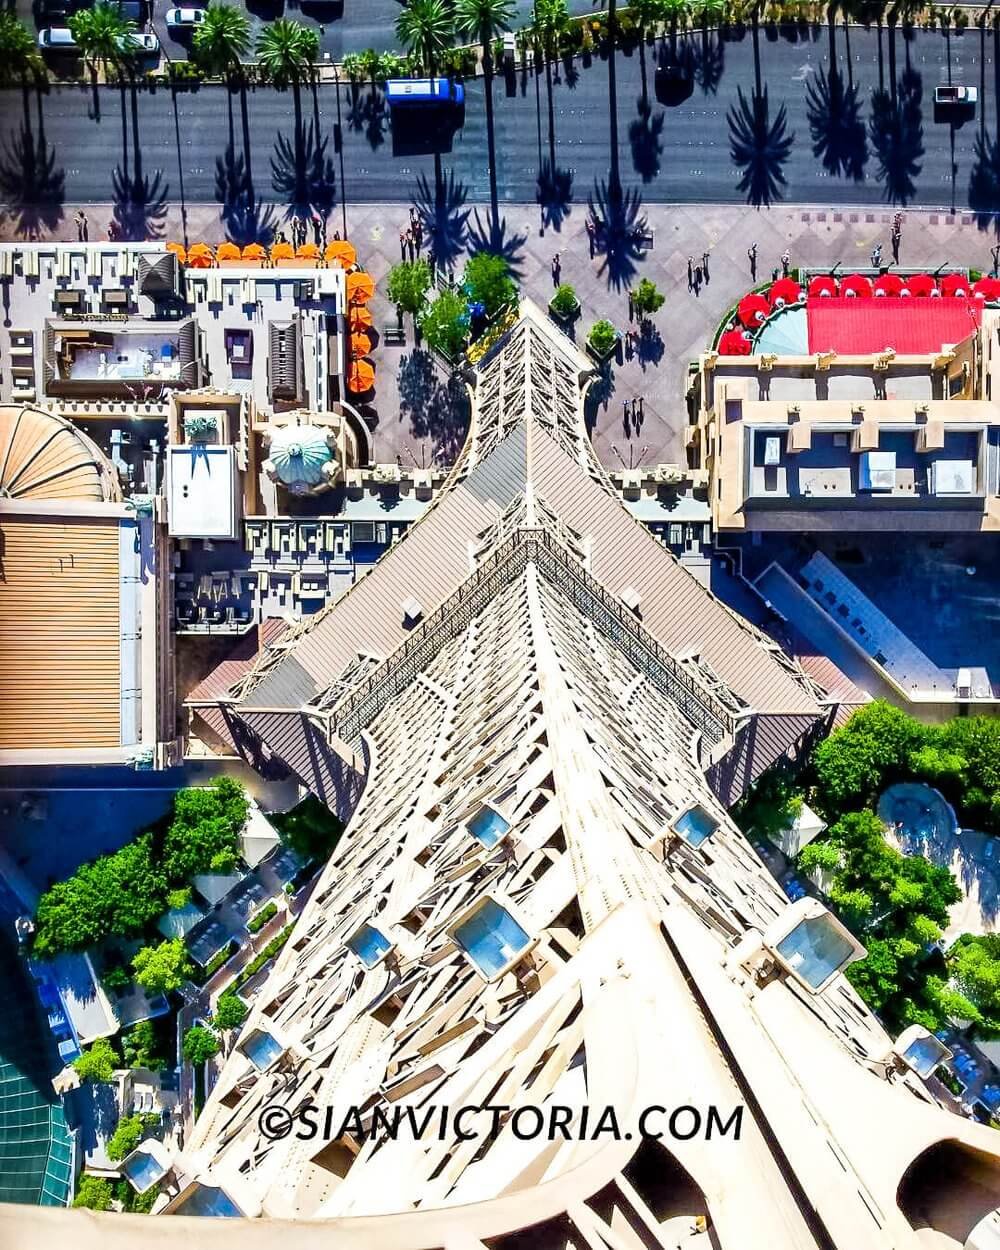 A view of Paris Las Vegas's hotel tower, from the top of the